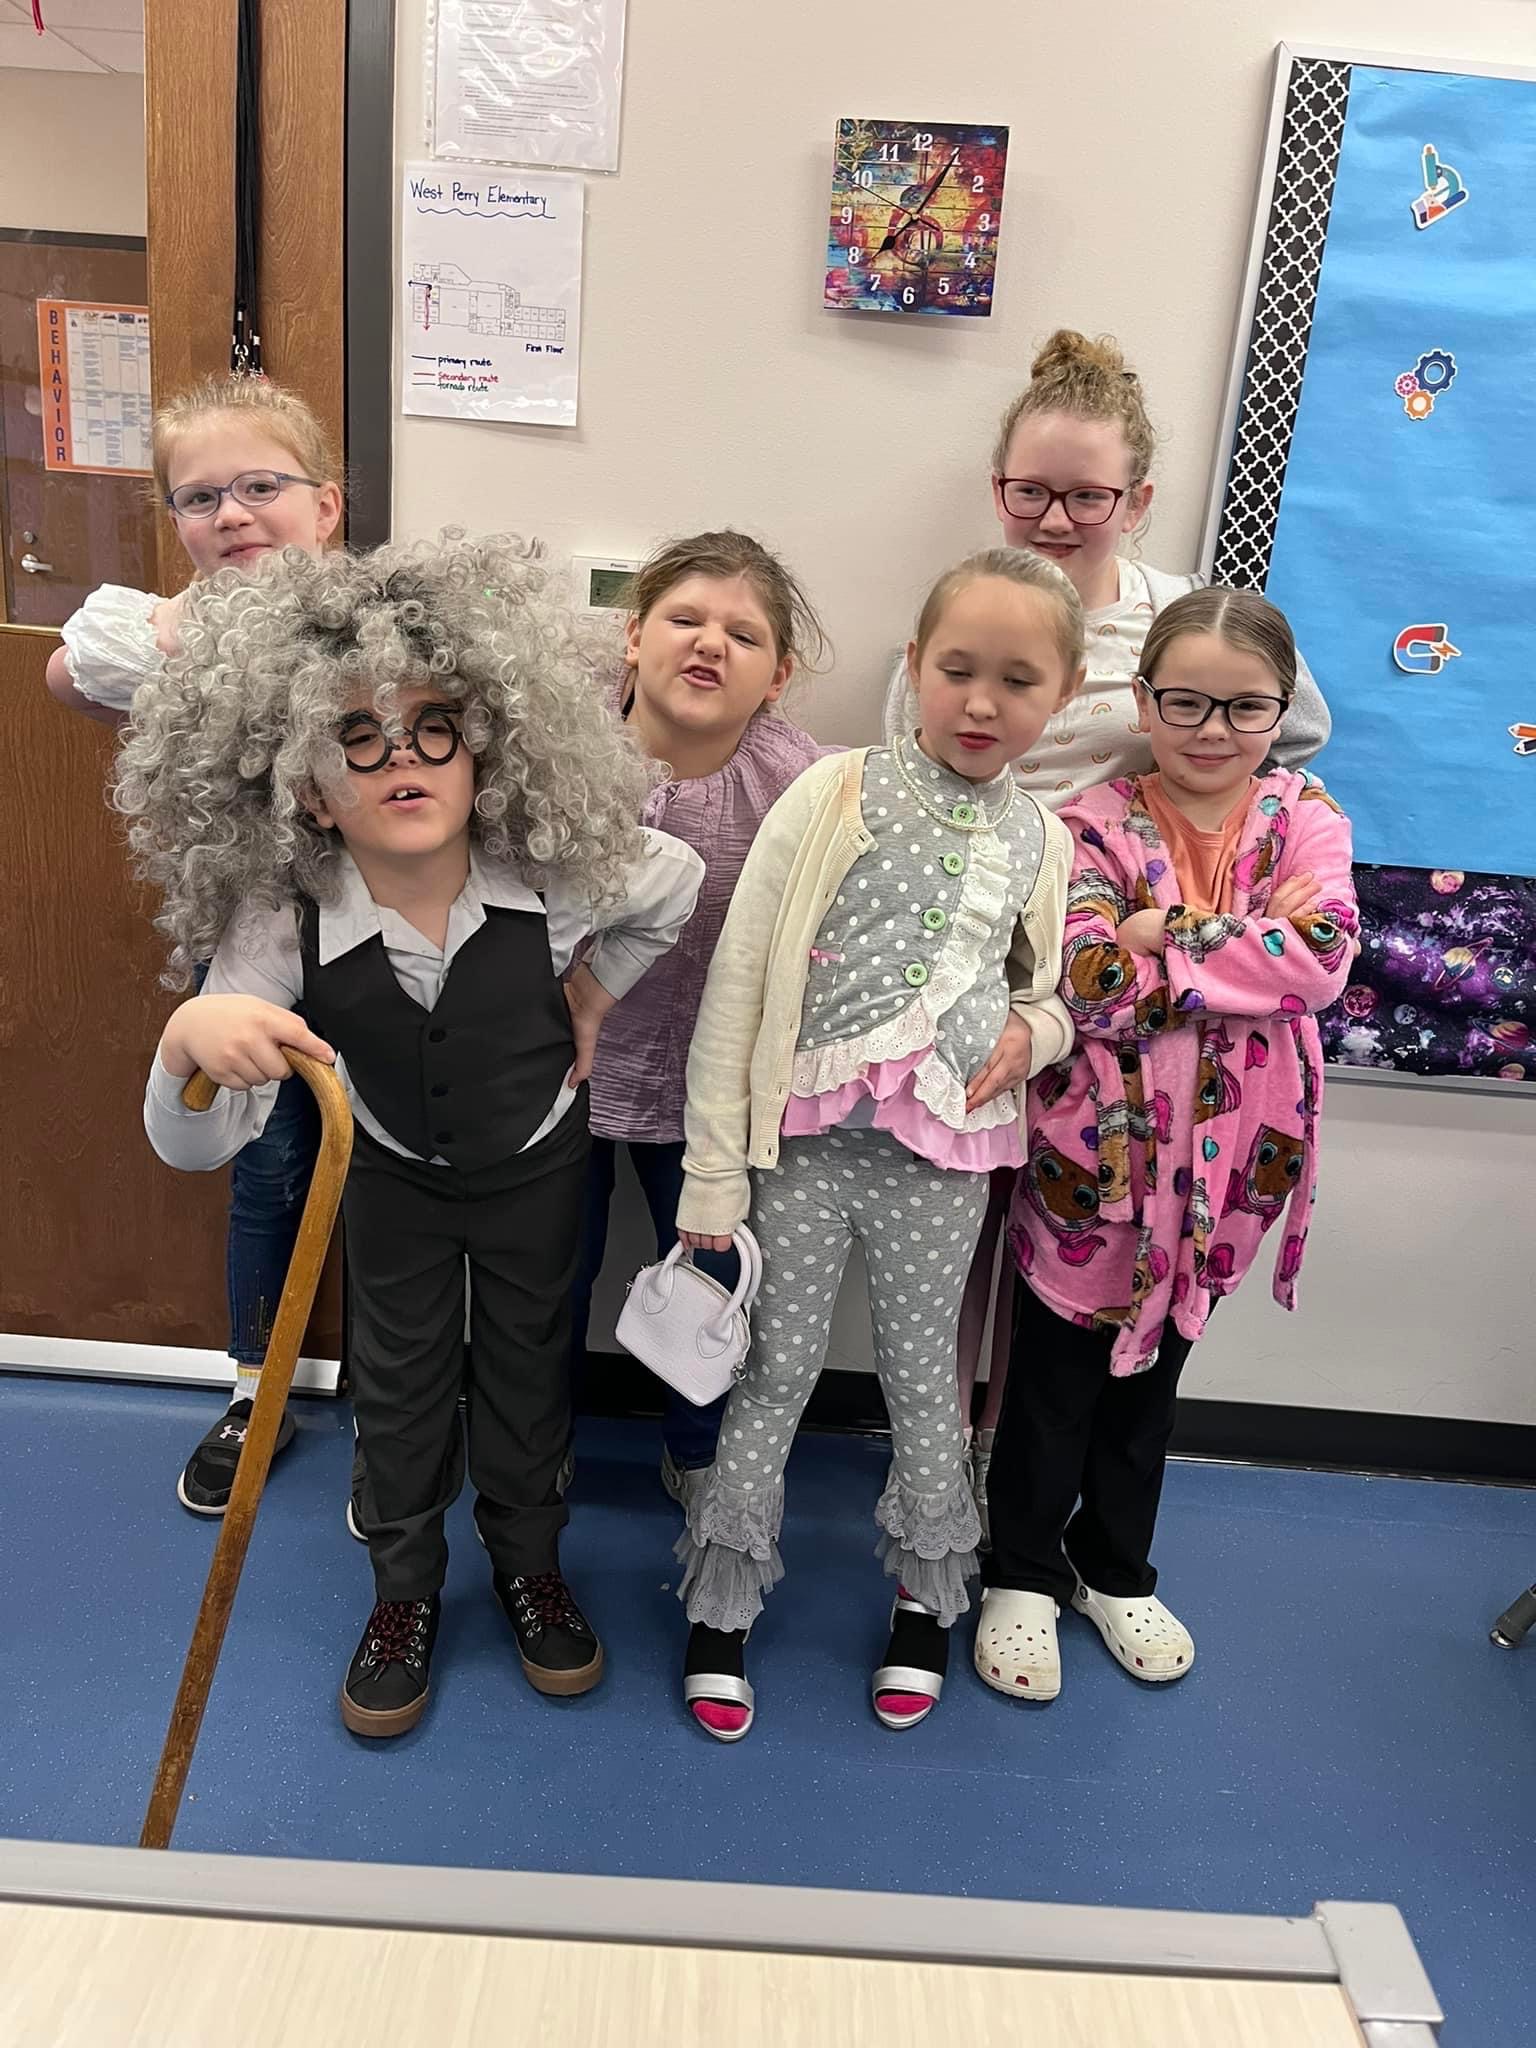 Students dressed as older people for 100th day